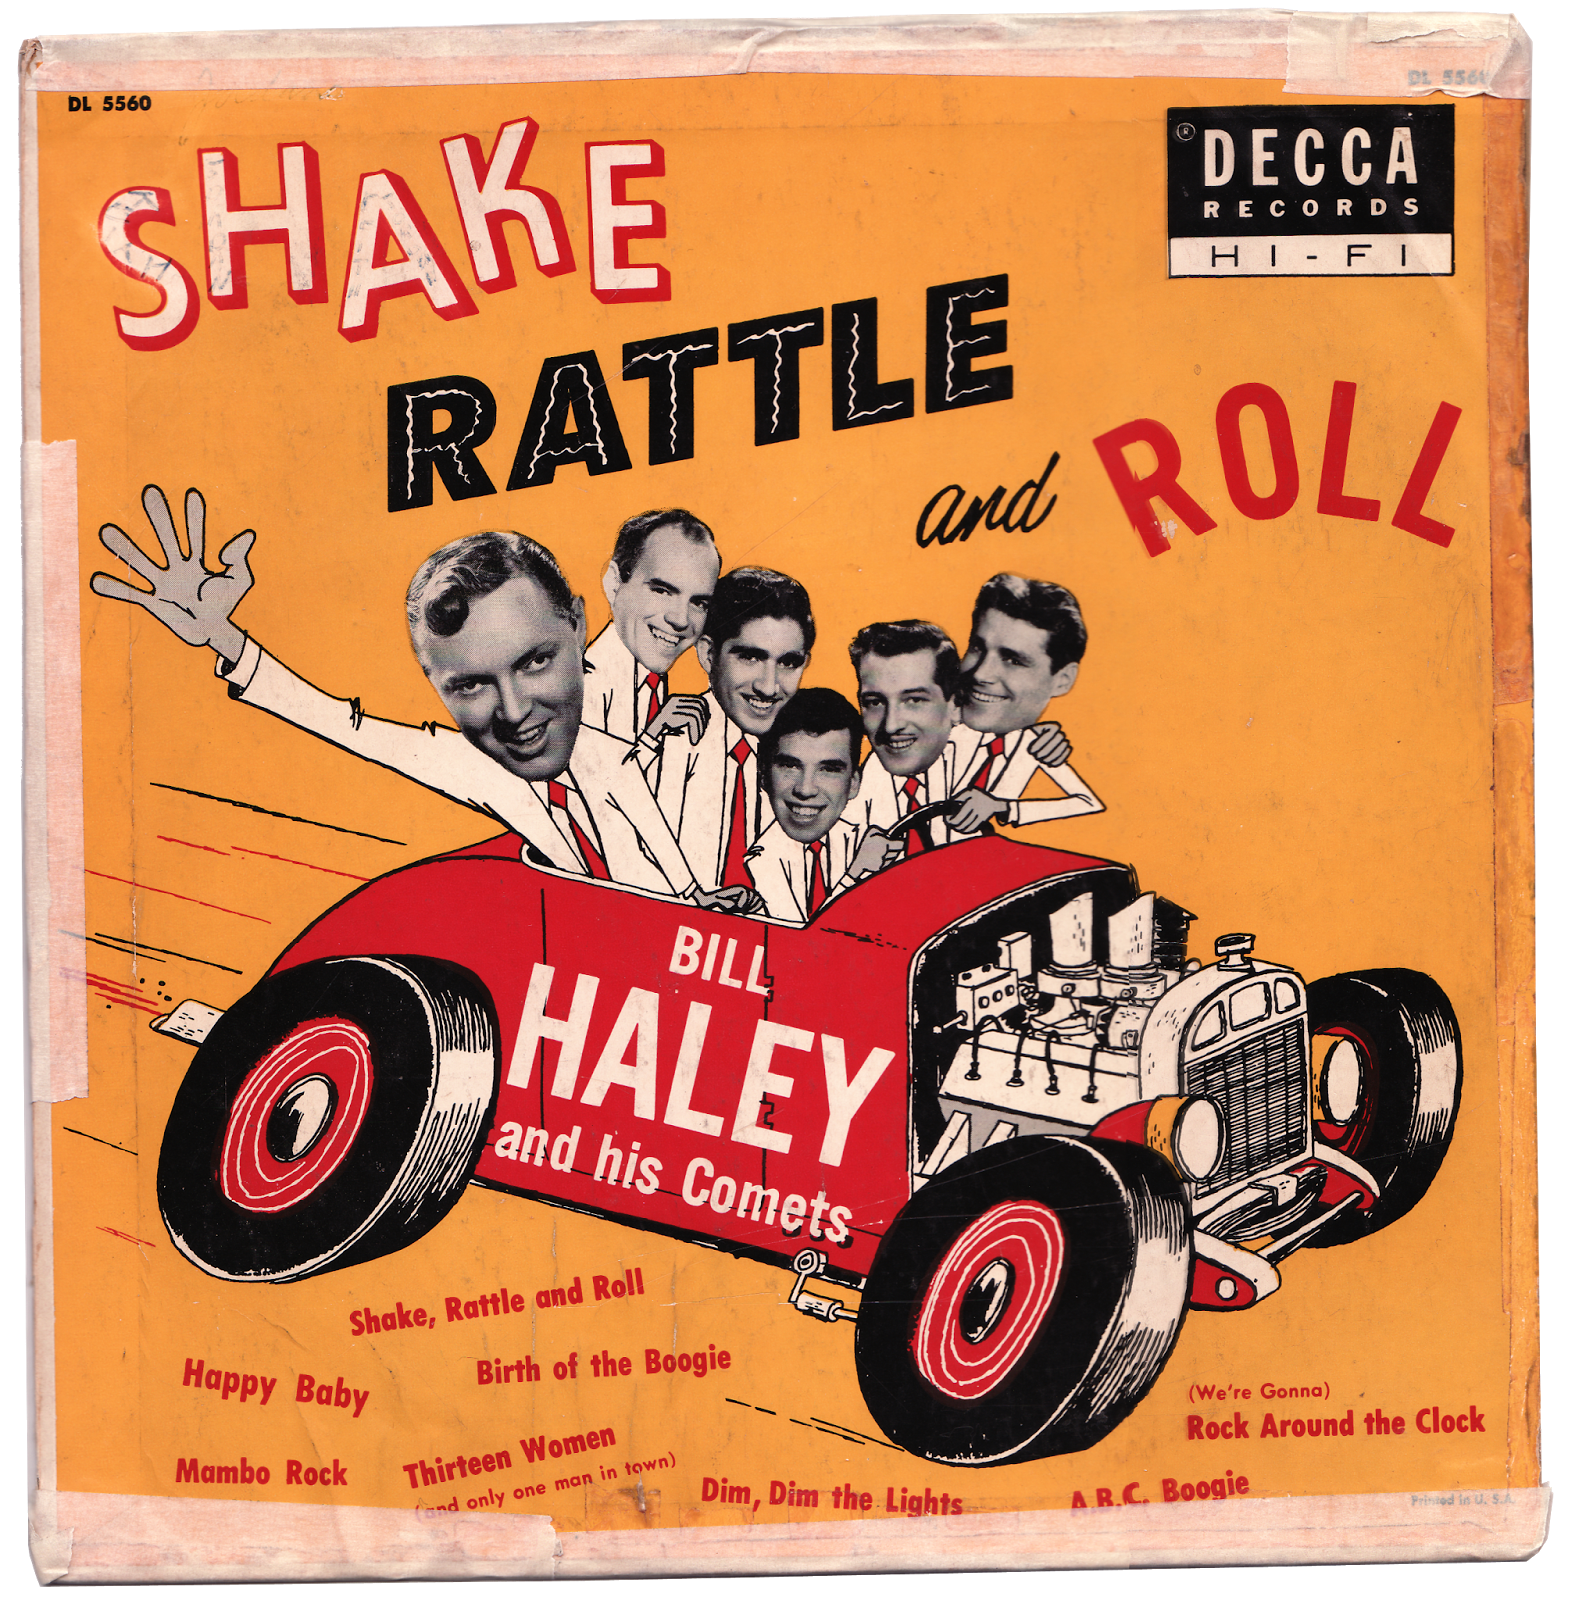 Shake rattle roll extreme. Shake Rattle and Roll. Shake, Rattle and Roll Биг Джо тёрнер. Элвис Пресли Shake, Rattle and Roll. « Shake Rattle and Roll» Билла Хейли.